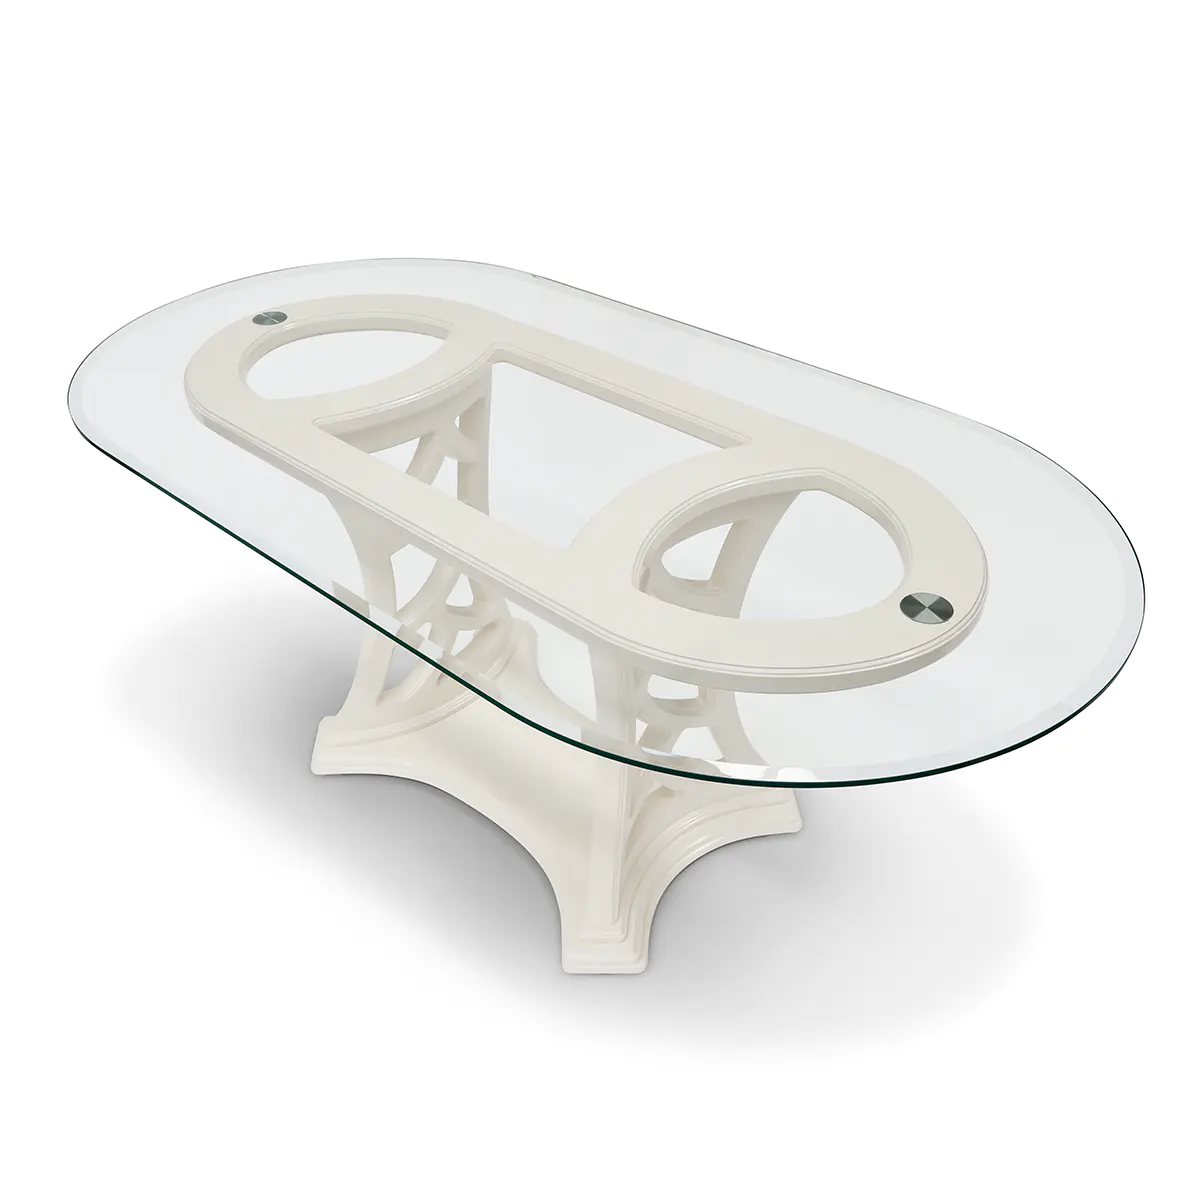 Monte Carlo oval table with glass top